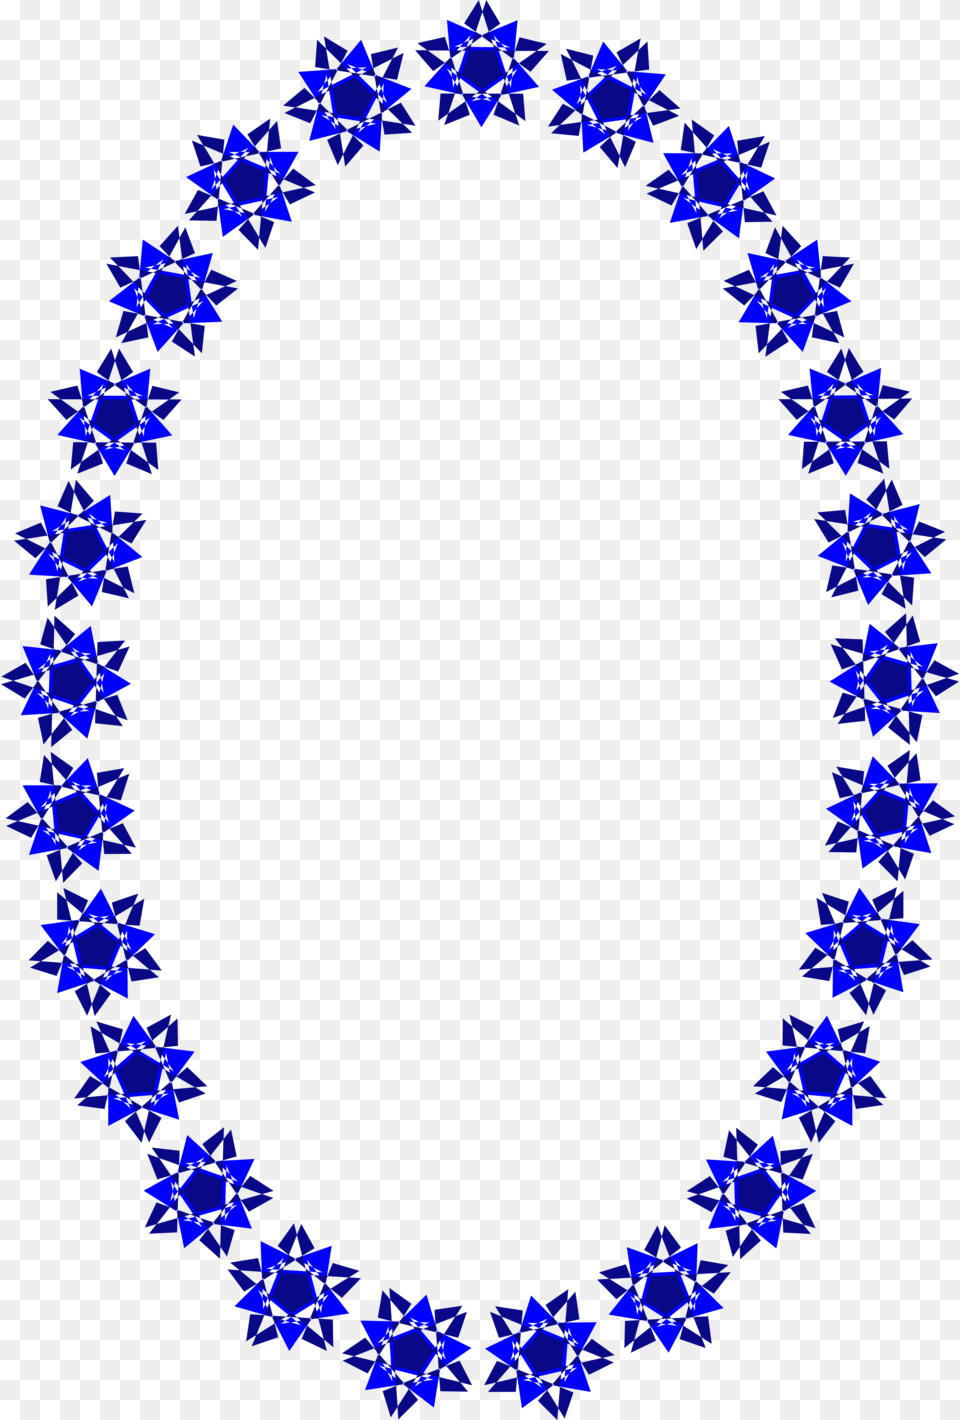 Border Blue Stock Photo Illustration Of A Blank Frame, Accessories, Oval, Flower, Plant Png